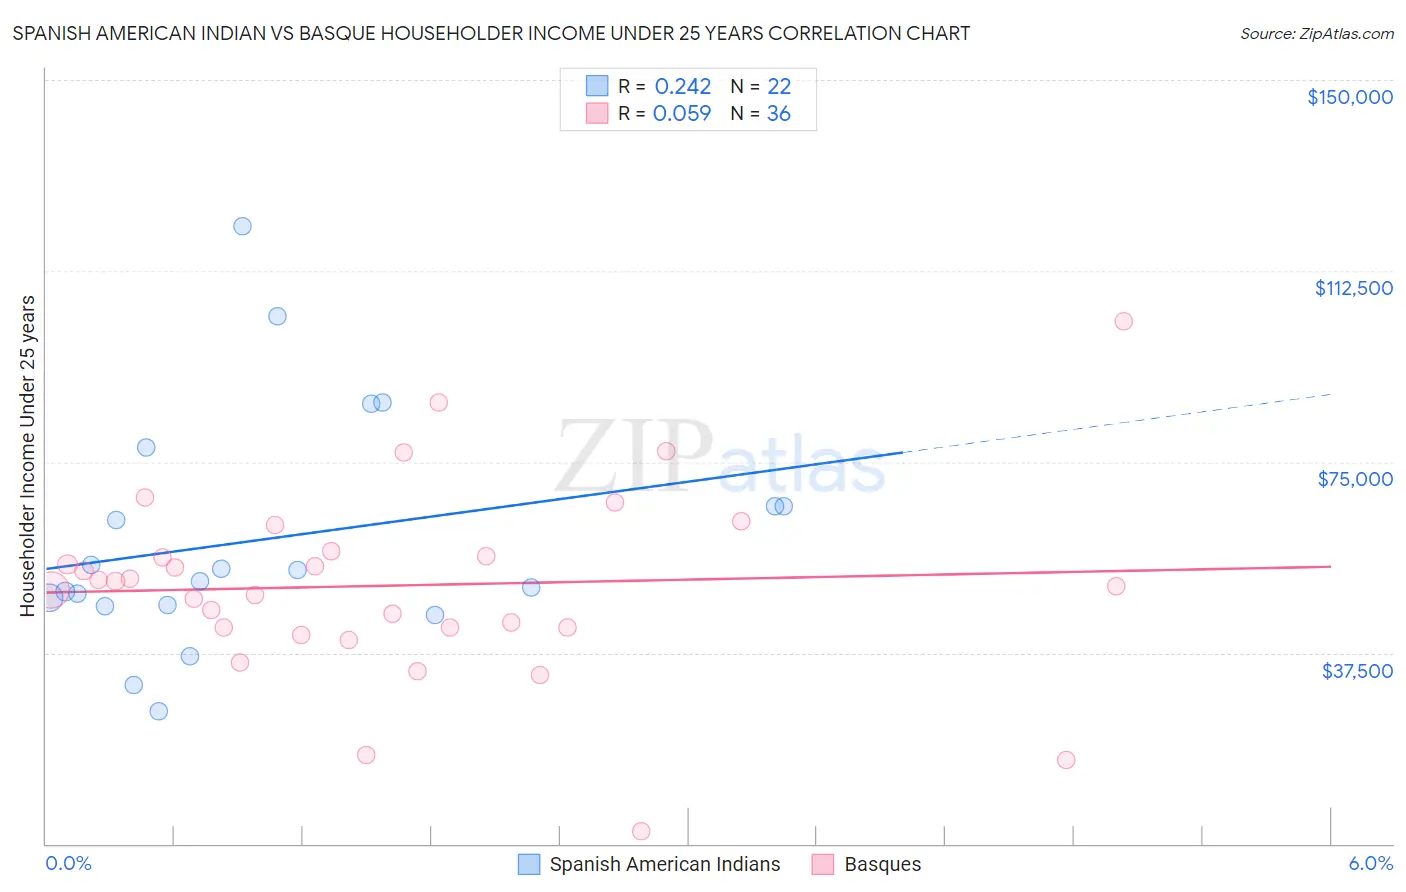 Spanish American Indian vs Basque Householder Income Under 25 years